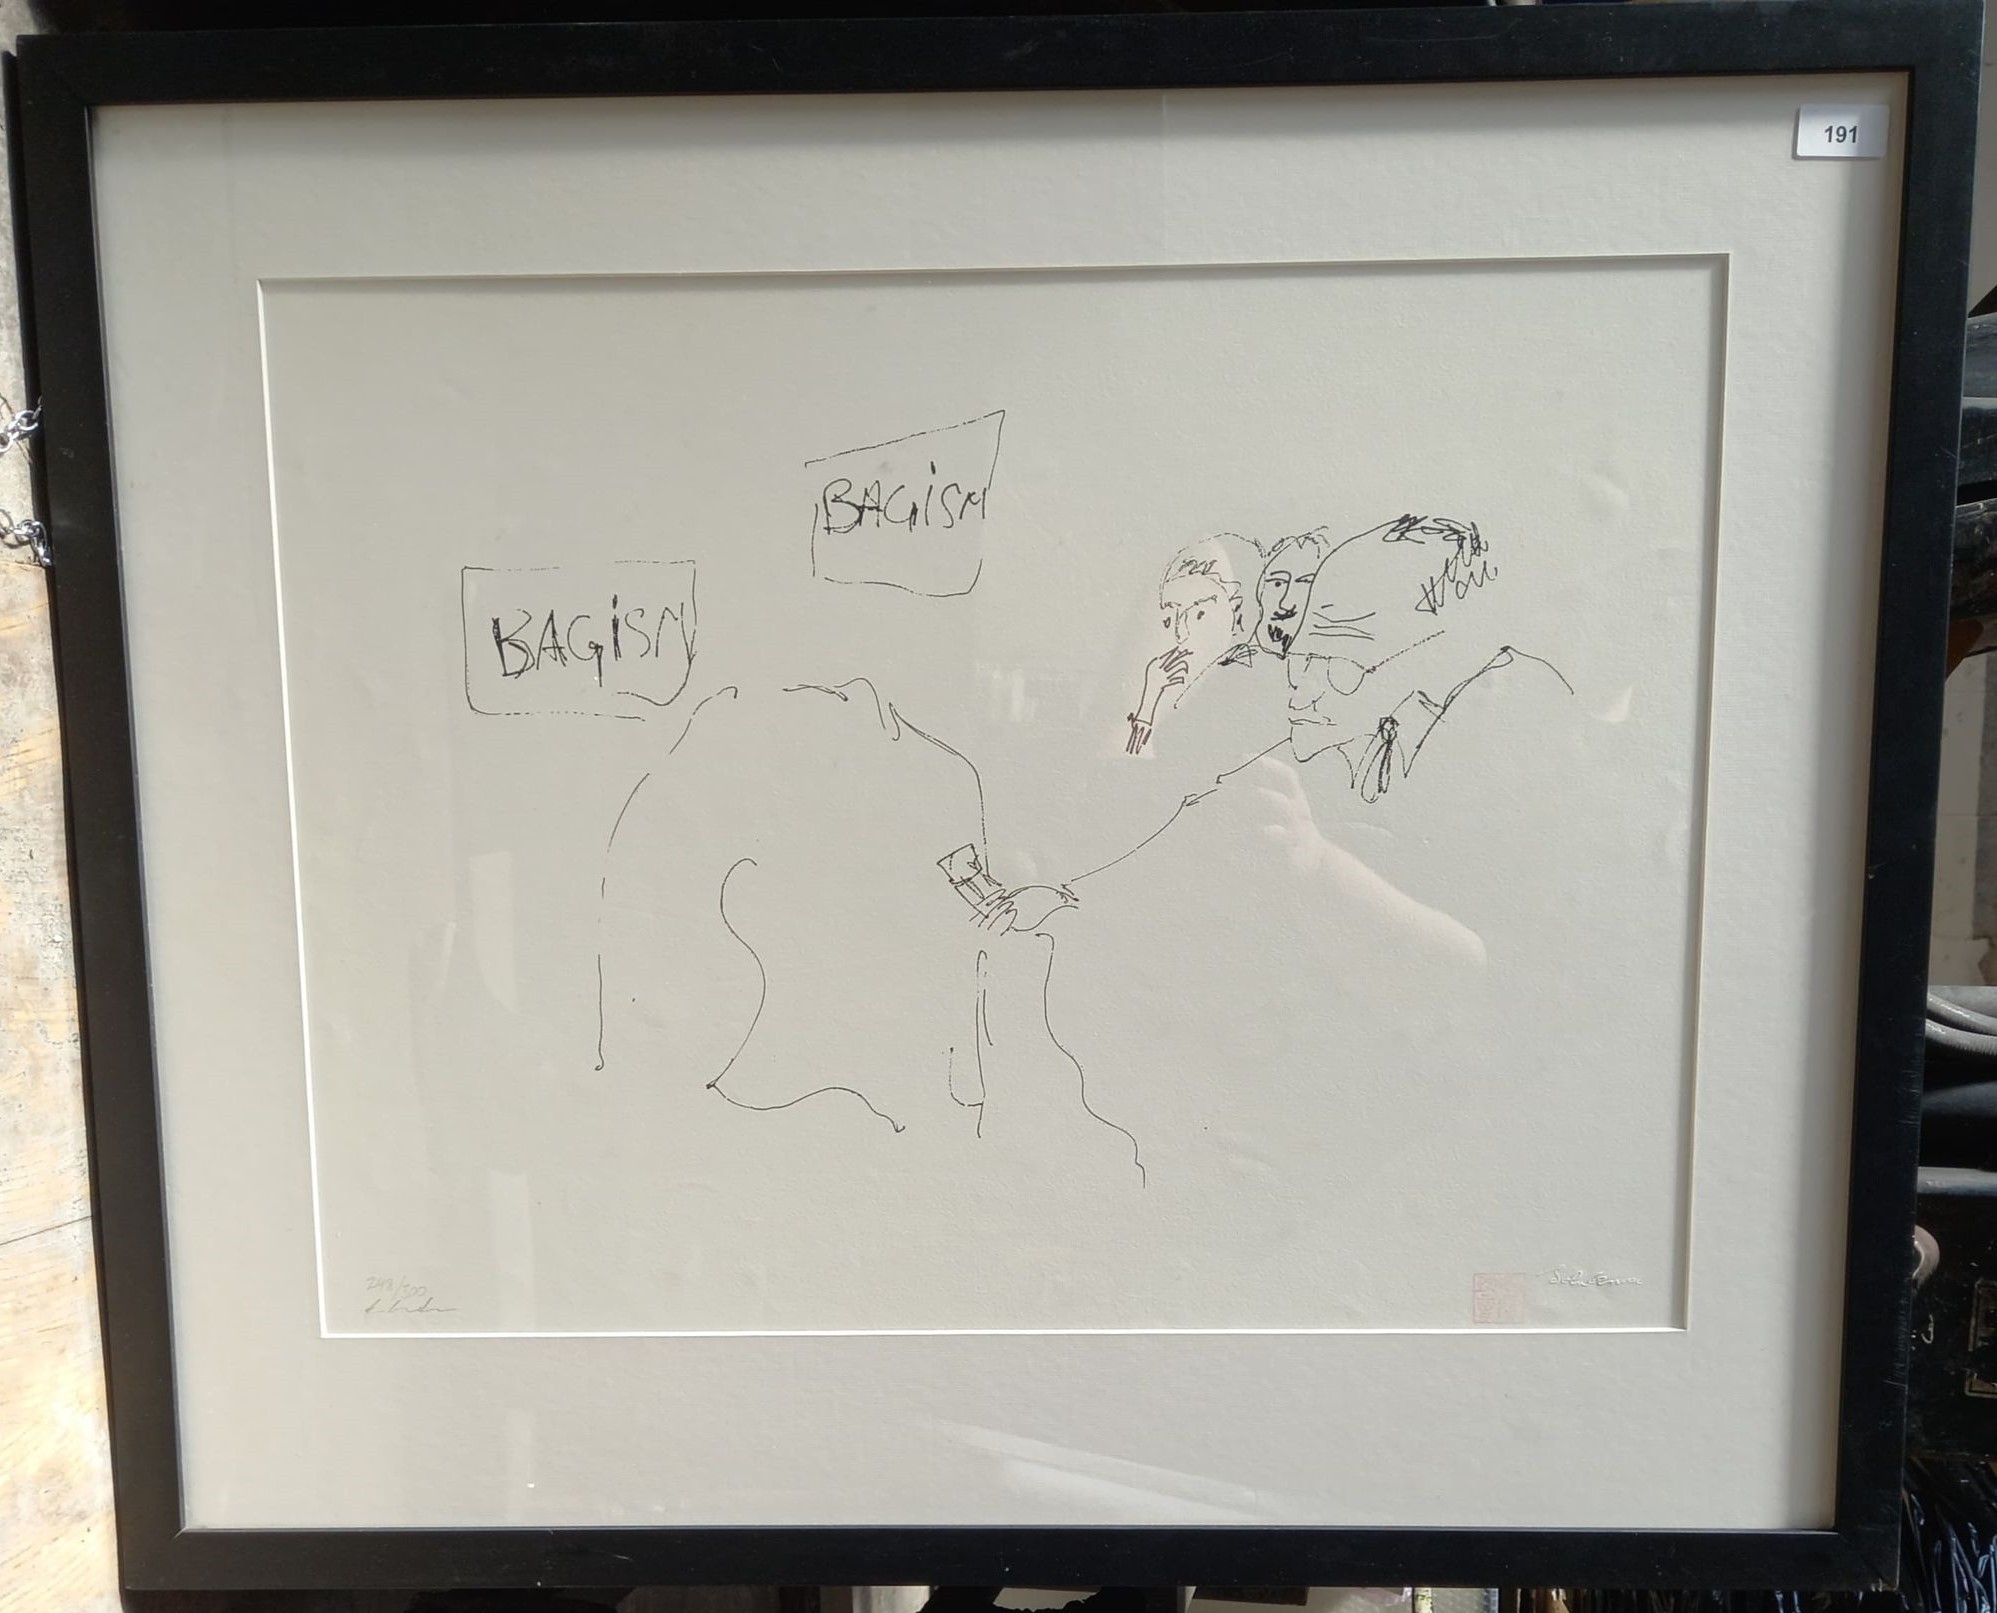 John Lennon Bagism framed and glazed limited edition lithograph hand signed and numbered by Yoko Ono